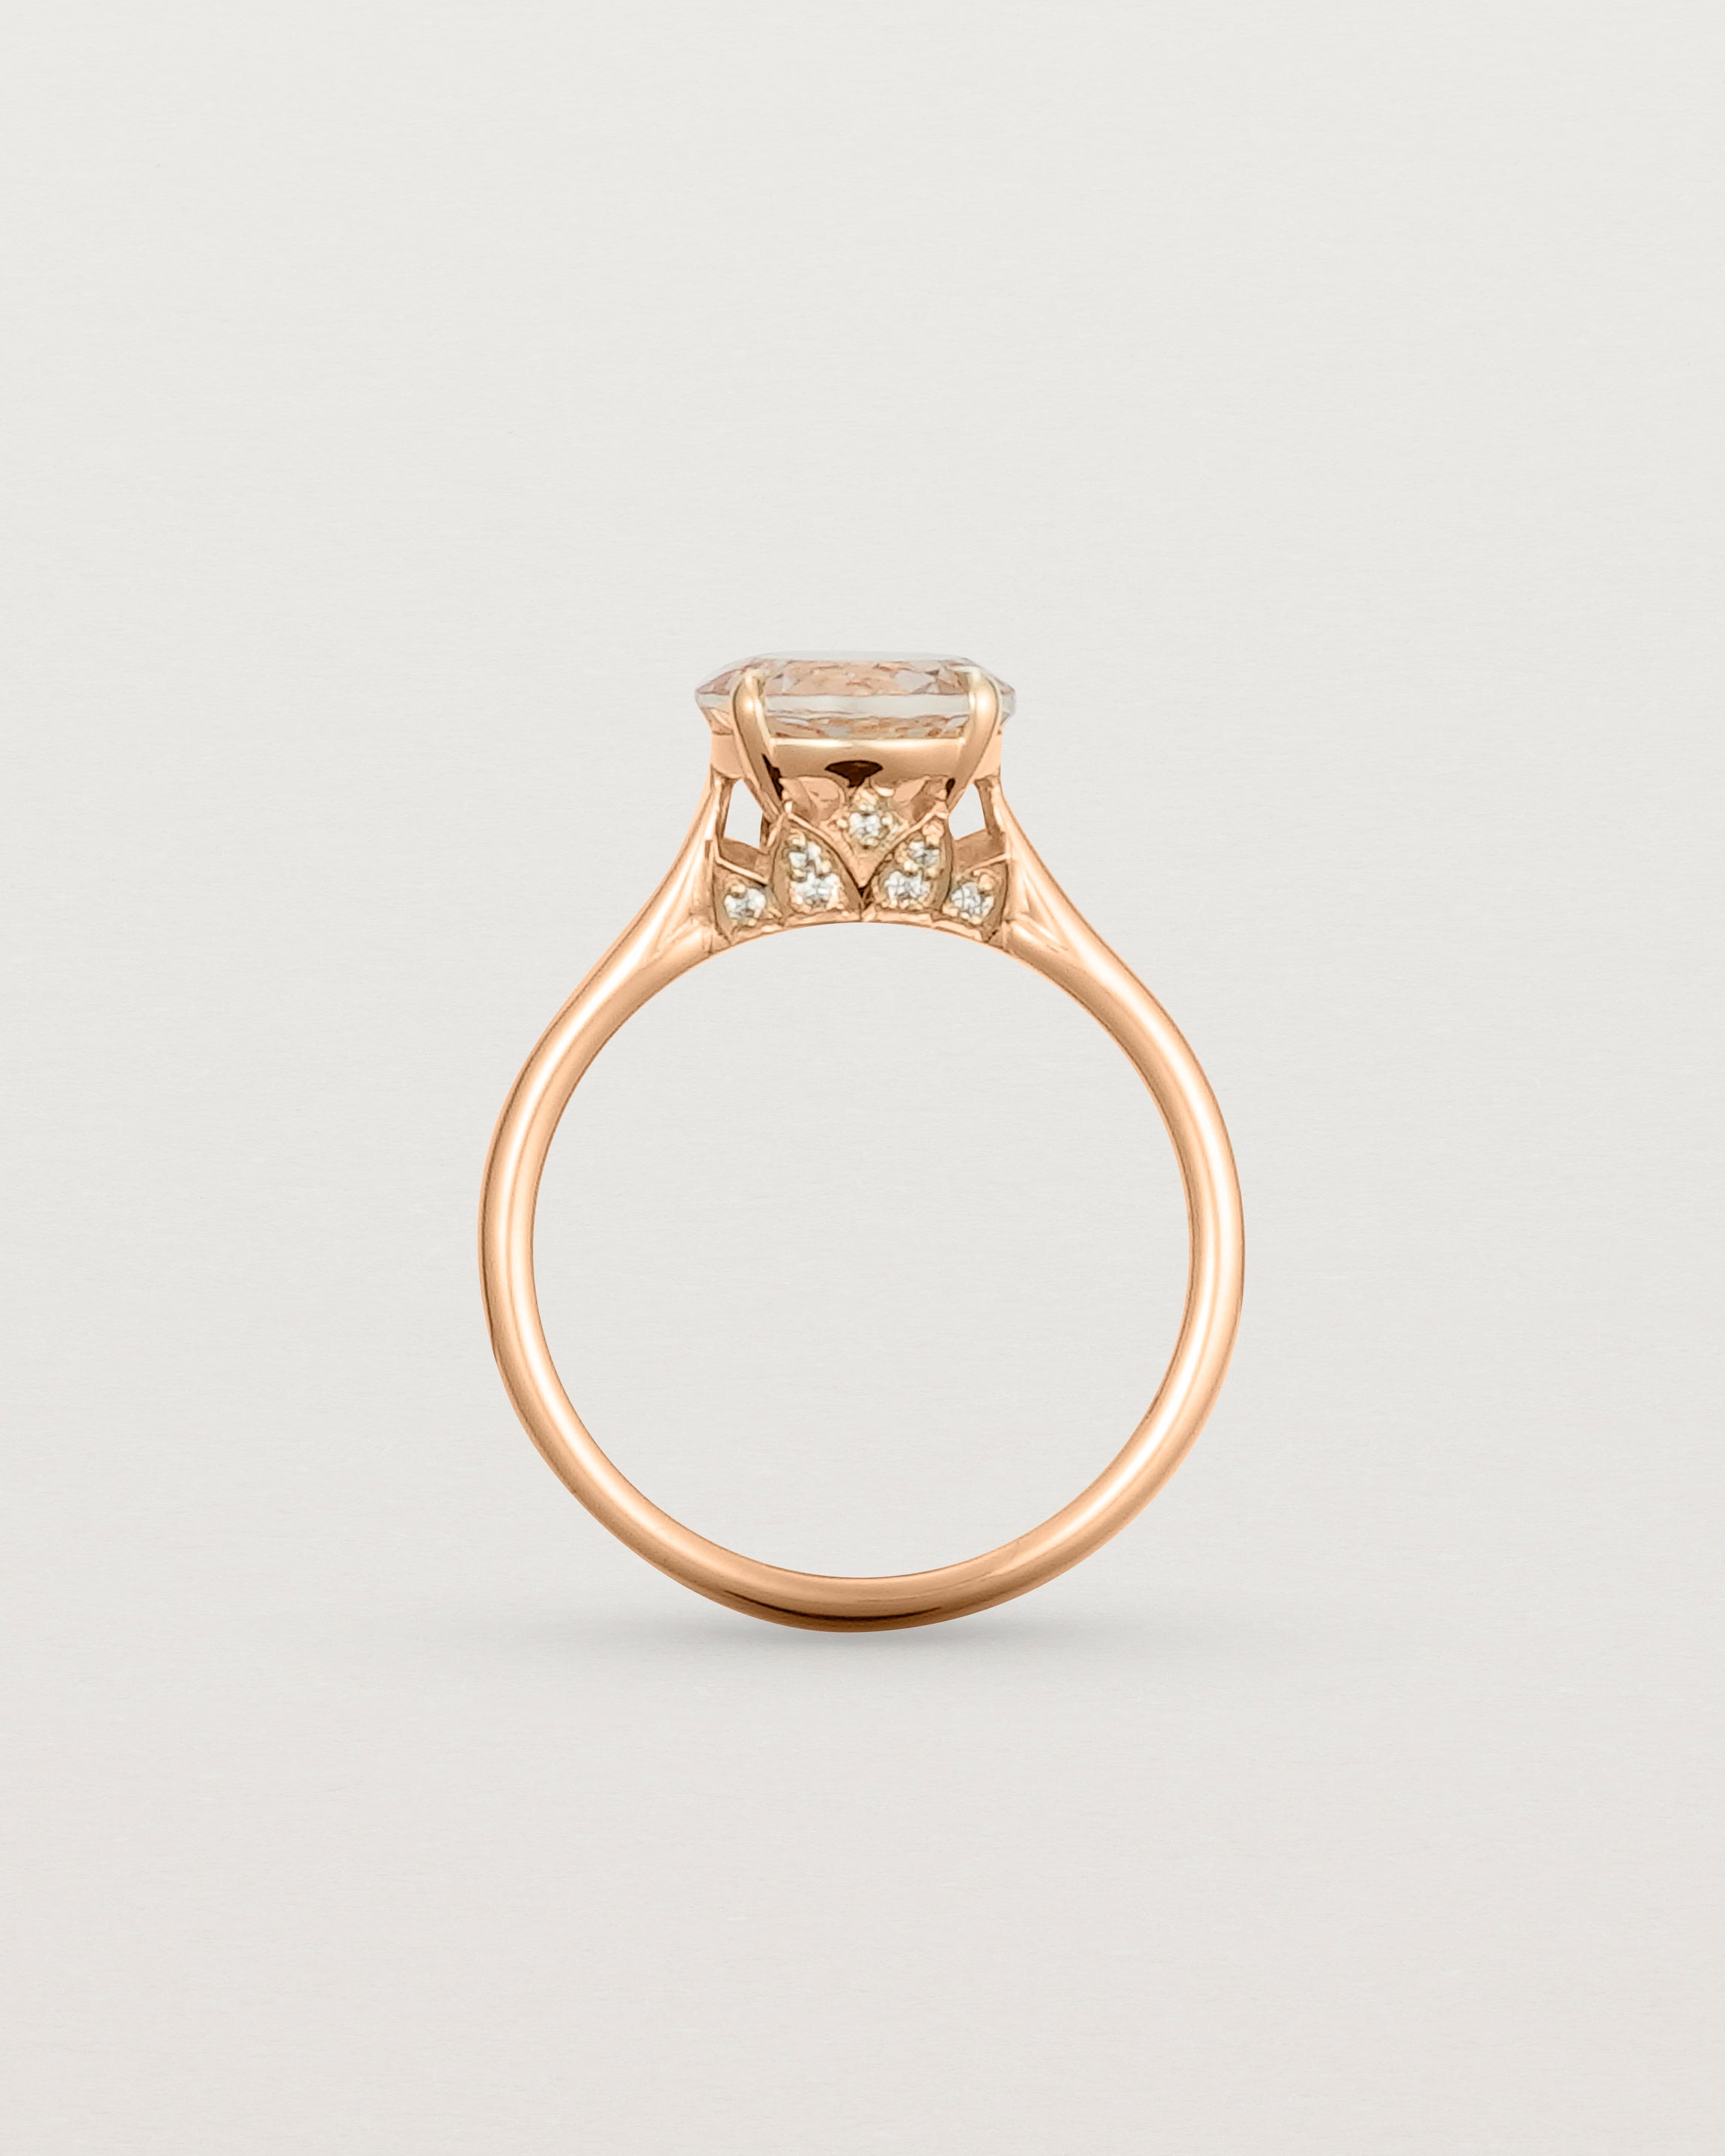 Standing view of the Kalina Round Solitaire | Savannah Sunstone | Rose Gold.